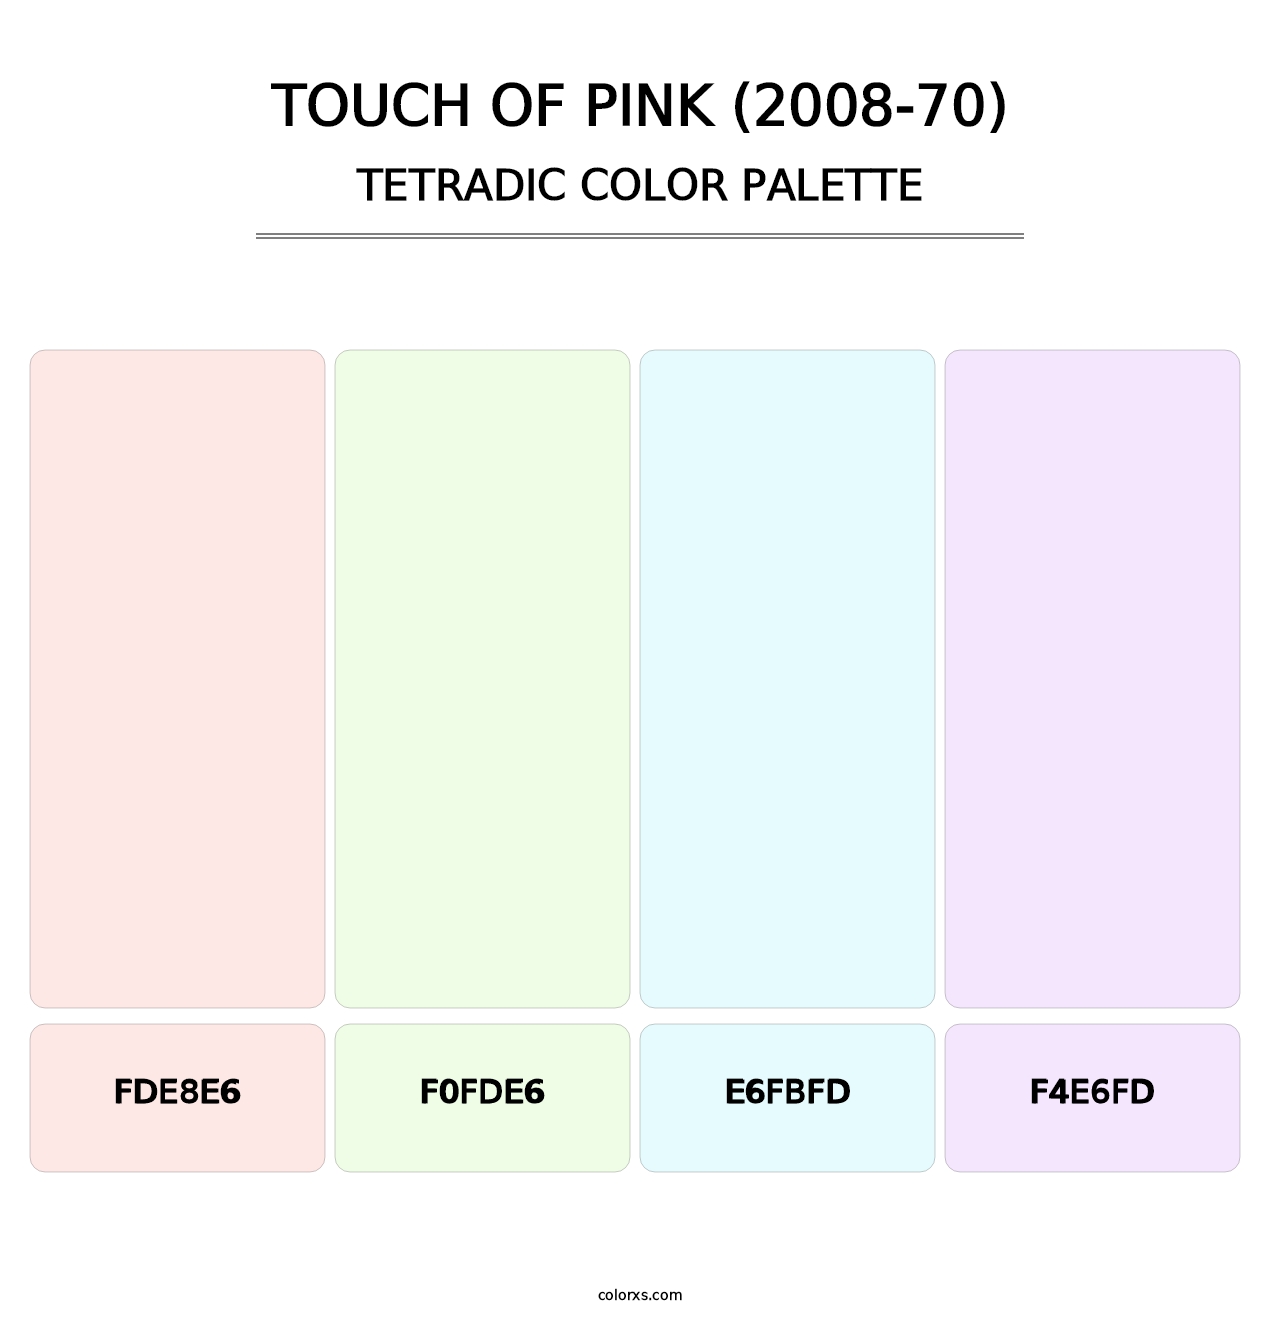 Touch of Pink (2008-70) - Tetradic Color Palette